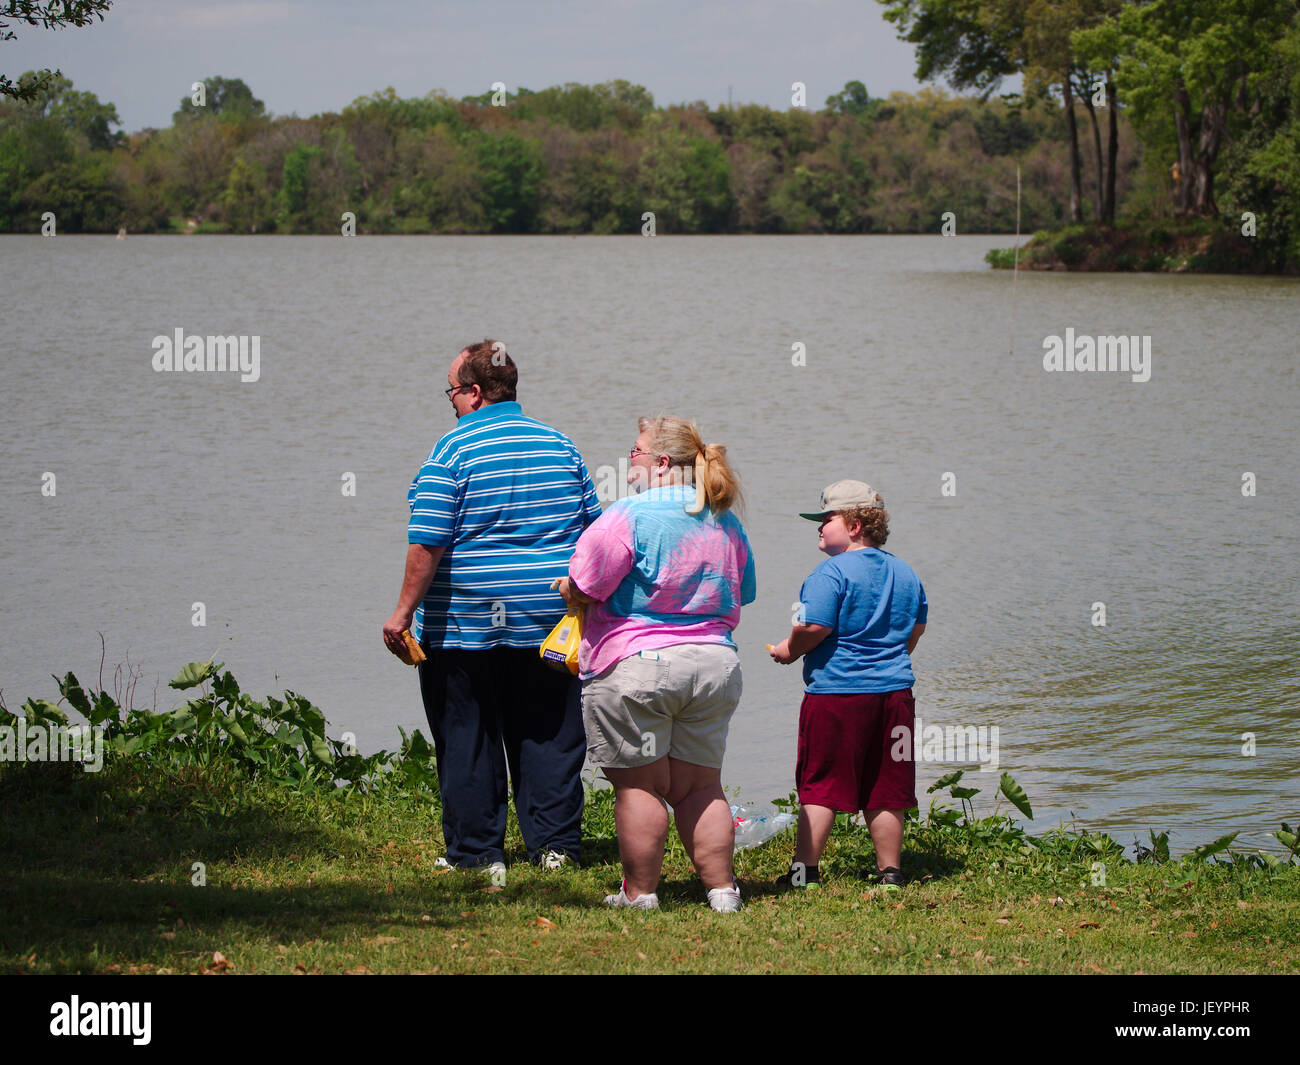 BATON ROUGE, LOUISIANA - 2011: Obese family stands by University Lake near Louisiana State University. Stock Photo